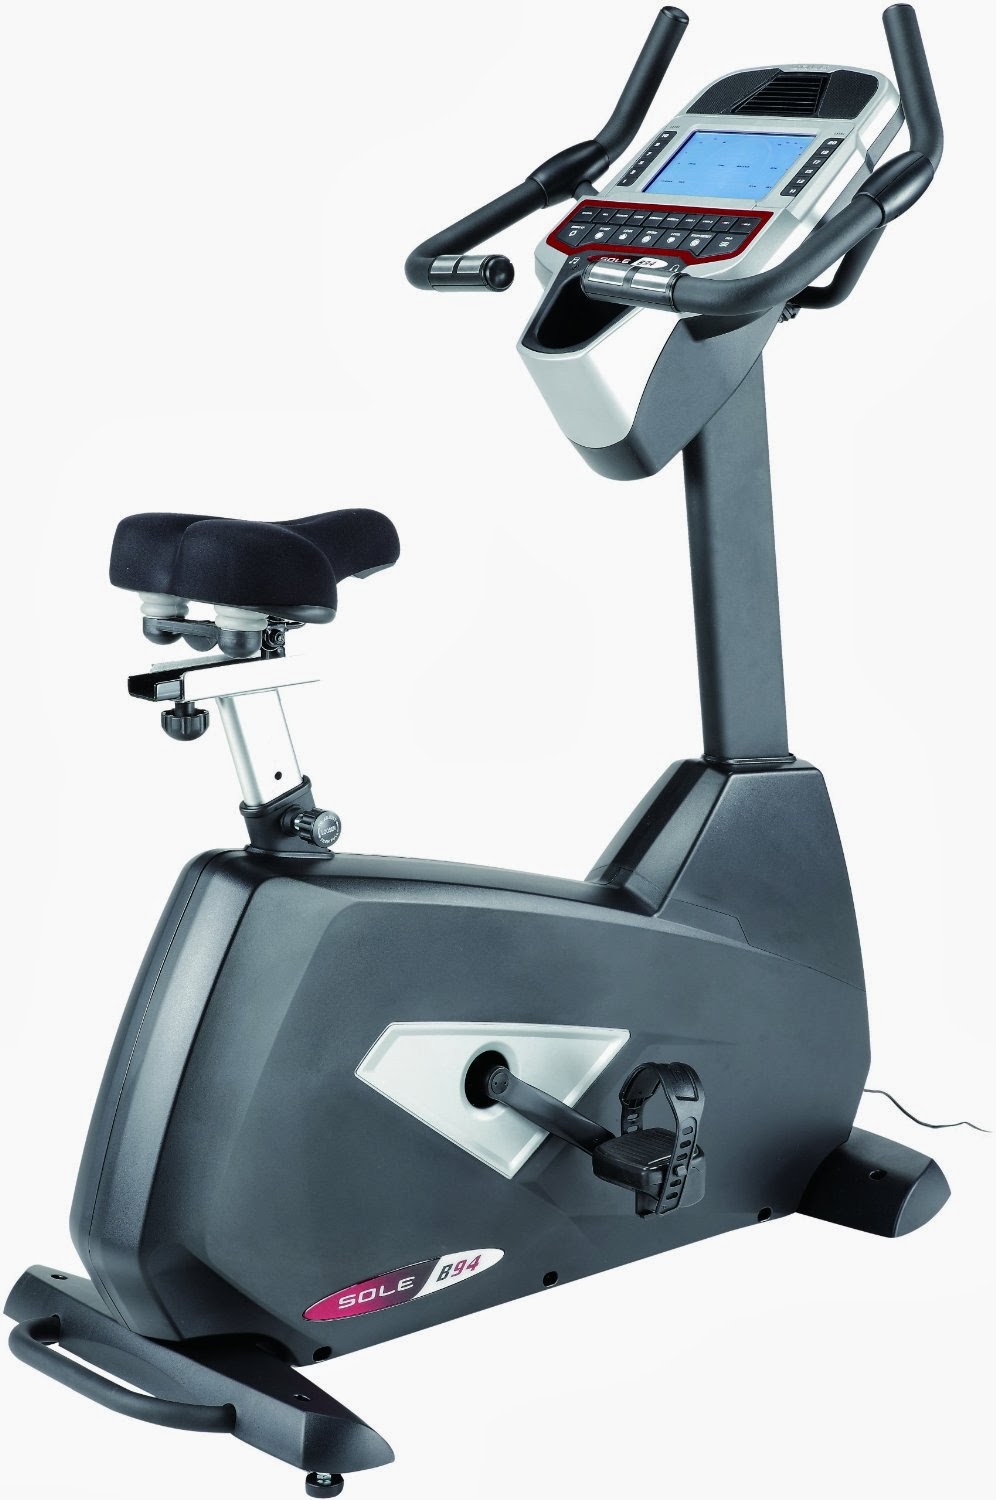 Sole Fitness B94 Upright Exercise Bike review of features by Exercise Bike Zone, buy at low discounted price